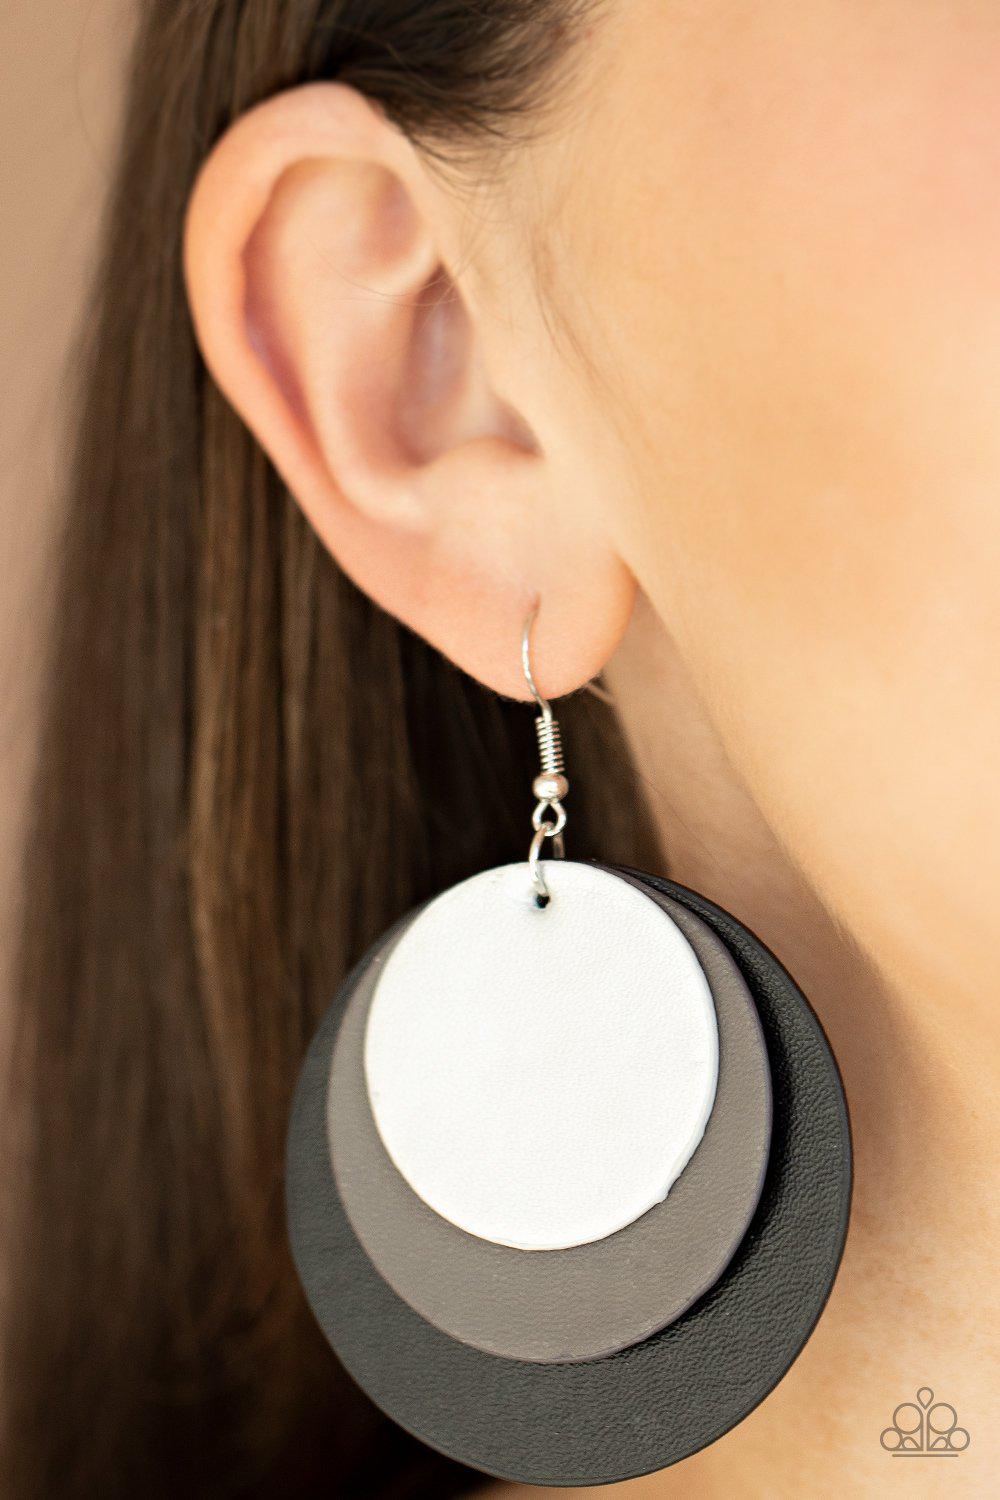 LEATHER Forecast Black Leather Earrings - Paparazzi Accessories-CarasShop.com - $5 Jewelry by Cara Jewels